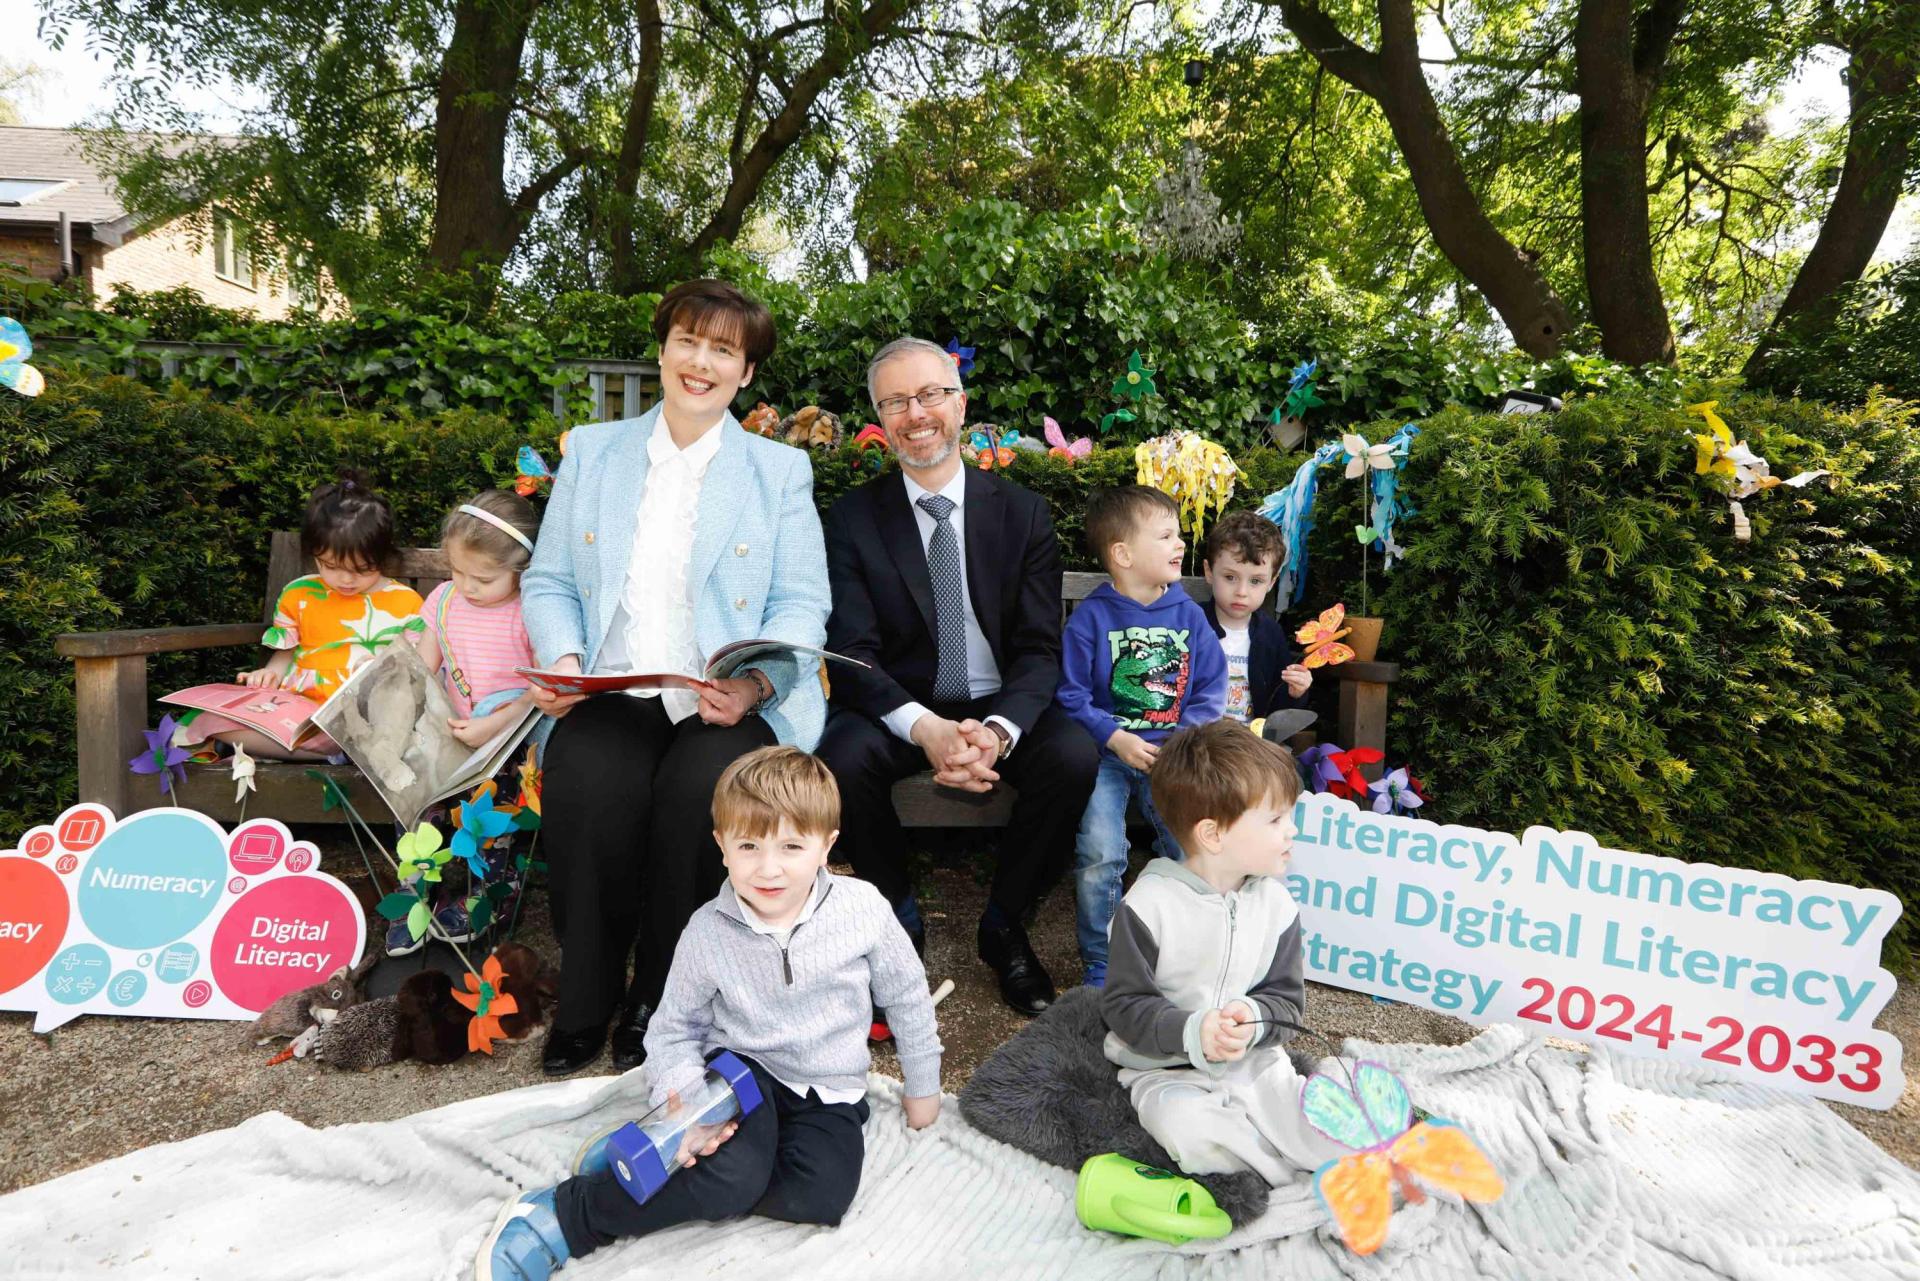 Ministers Norma Foley and Roderic Gorman pictured at the launch with young children.